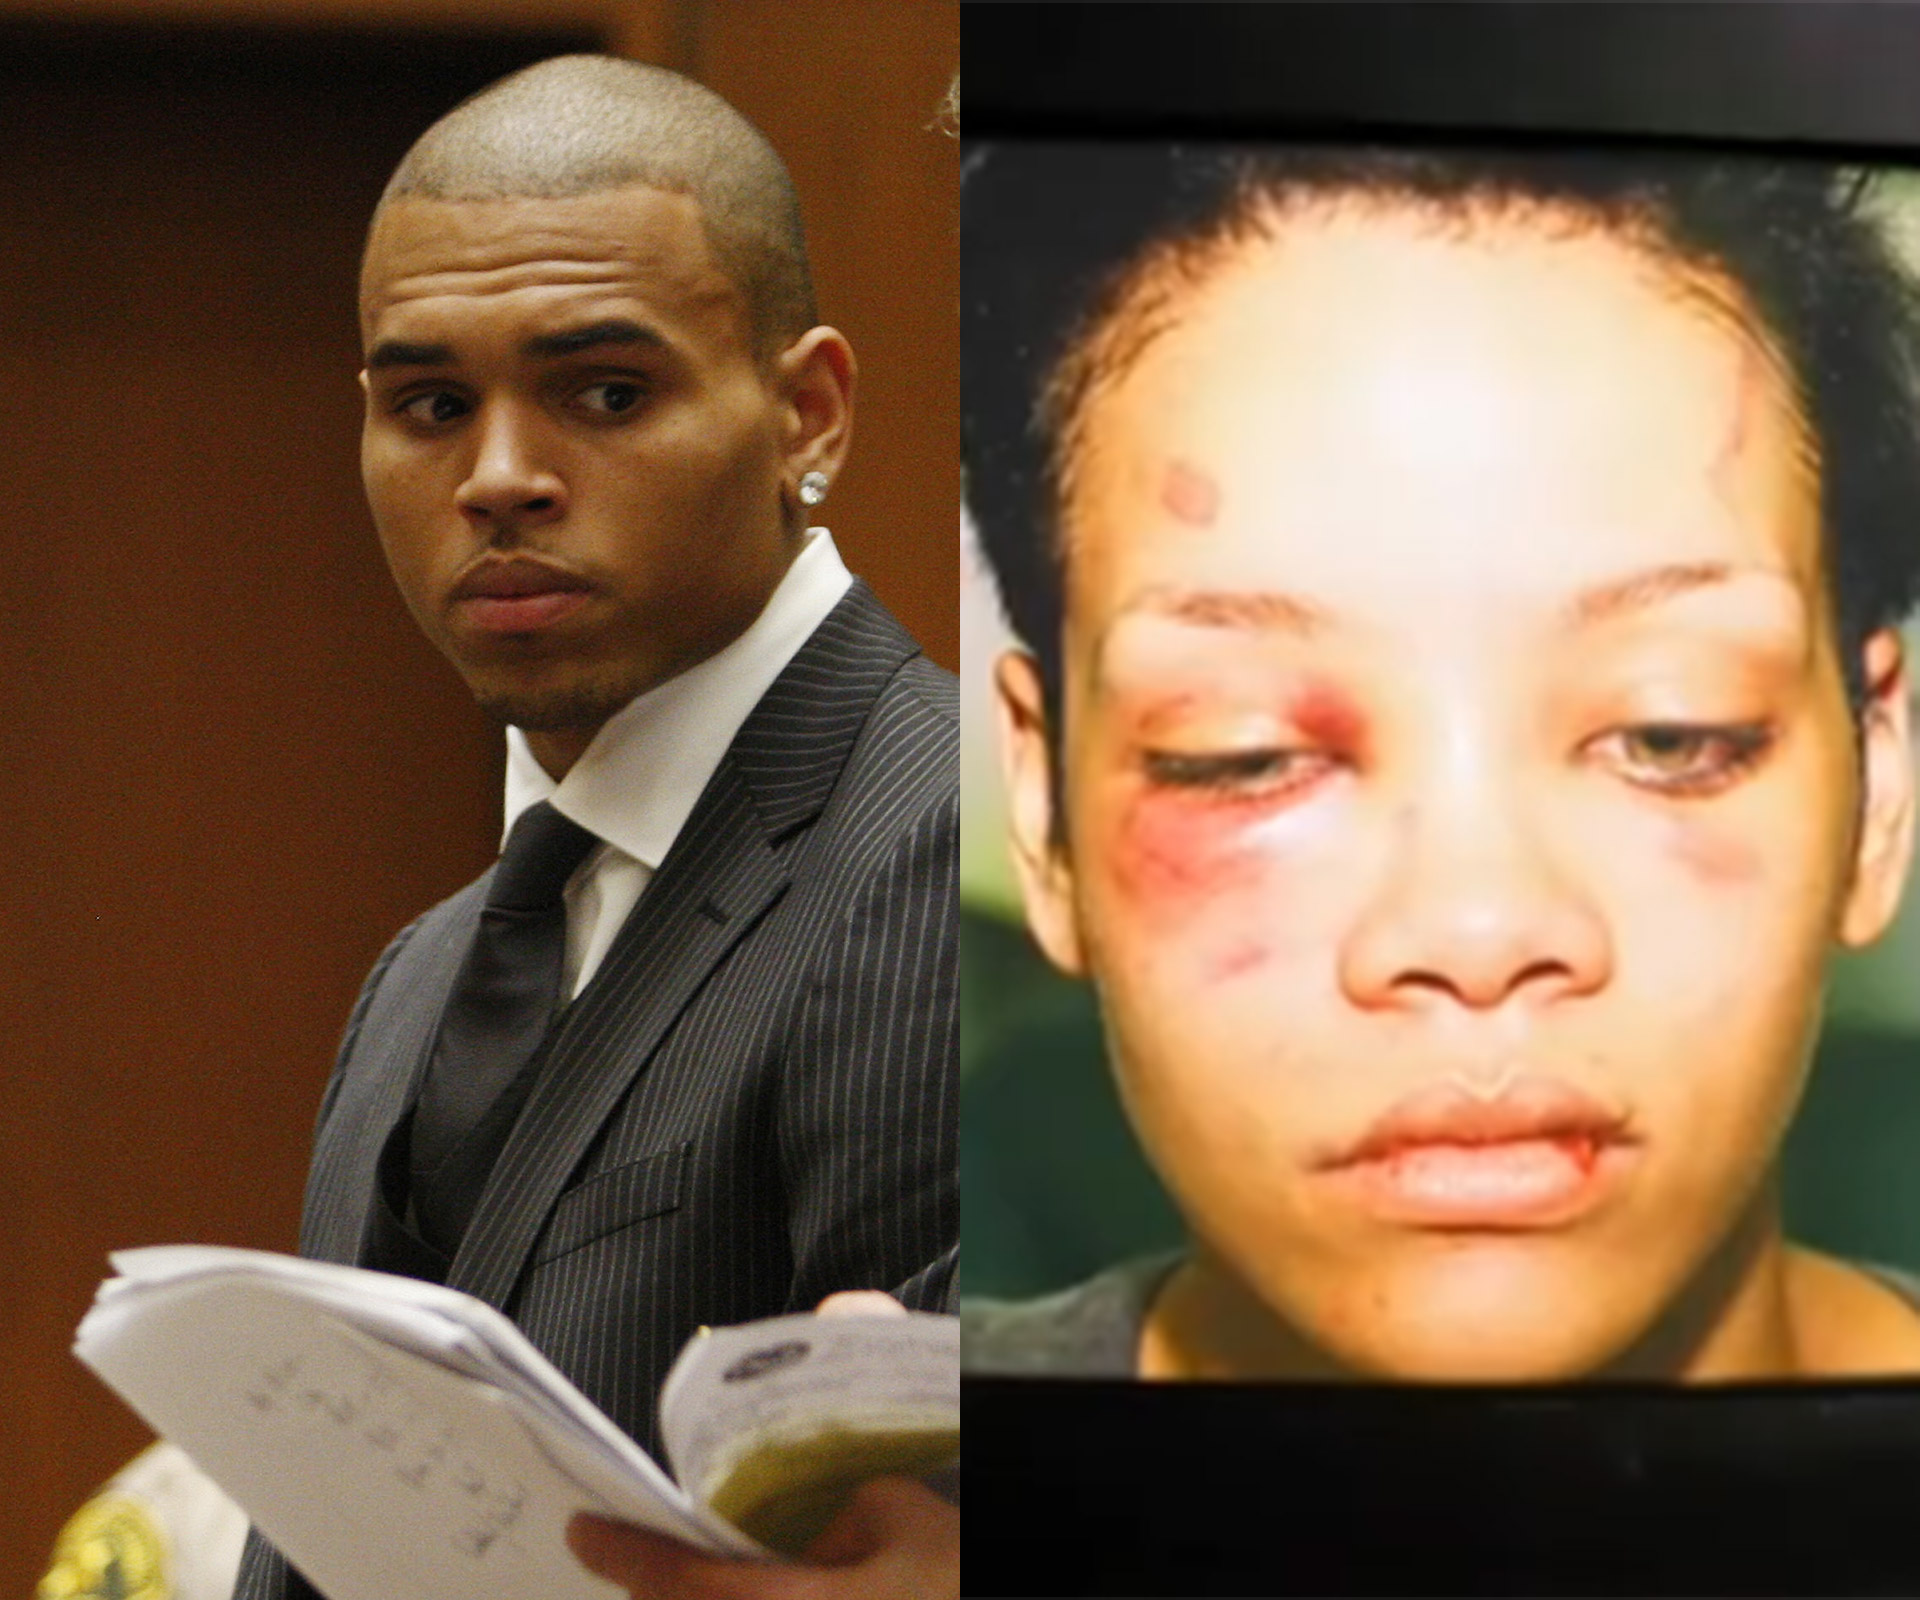 Chris Brown recounts moment he punched Rihanna in the face with a “closed fist”